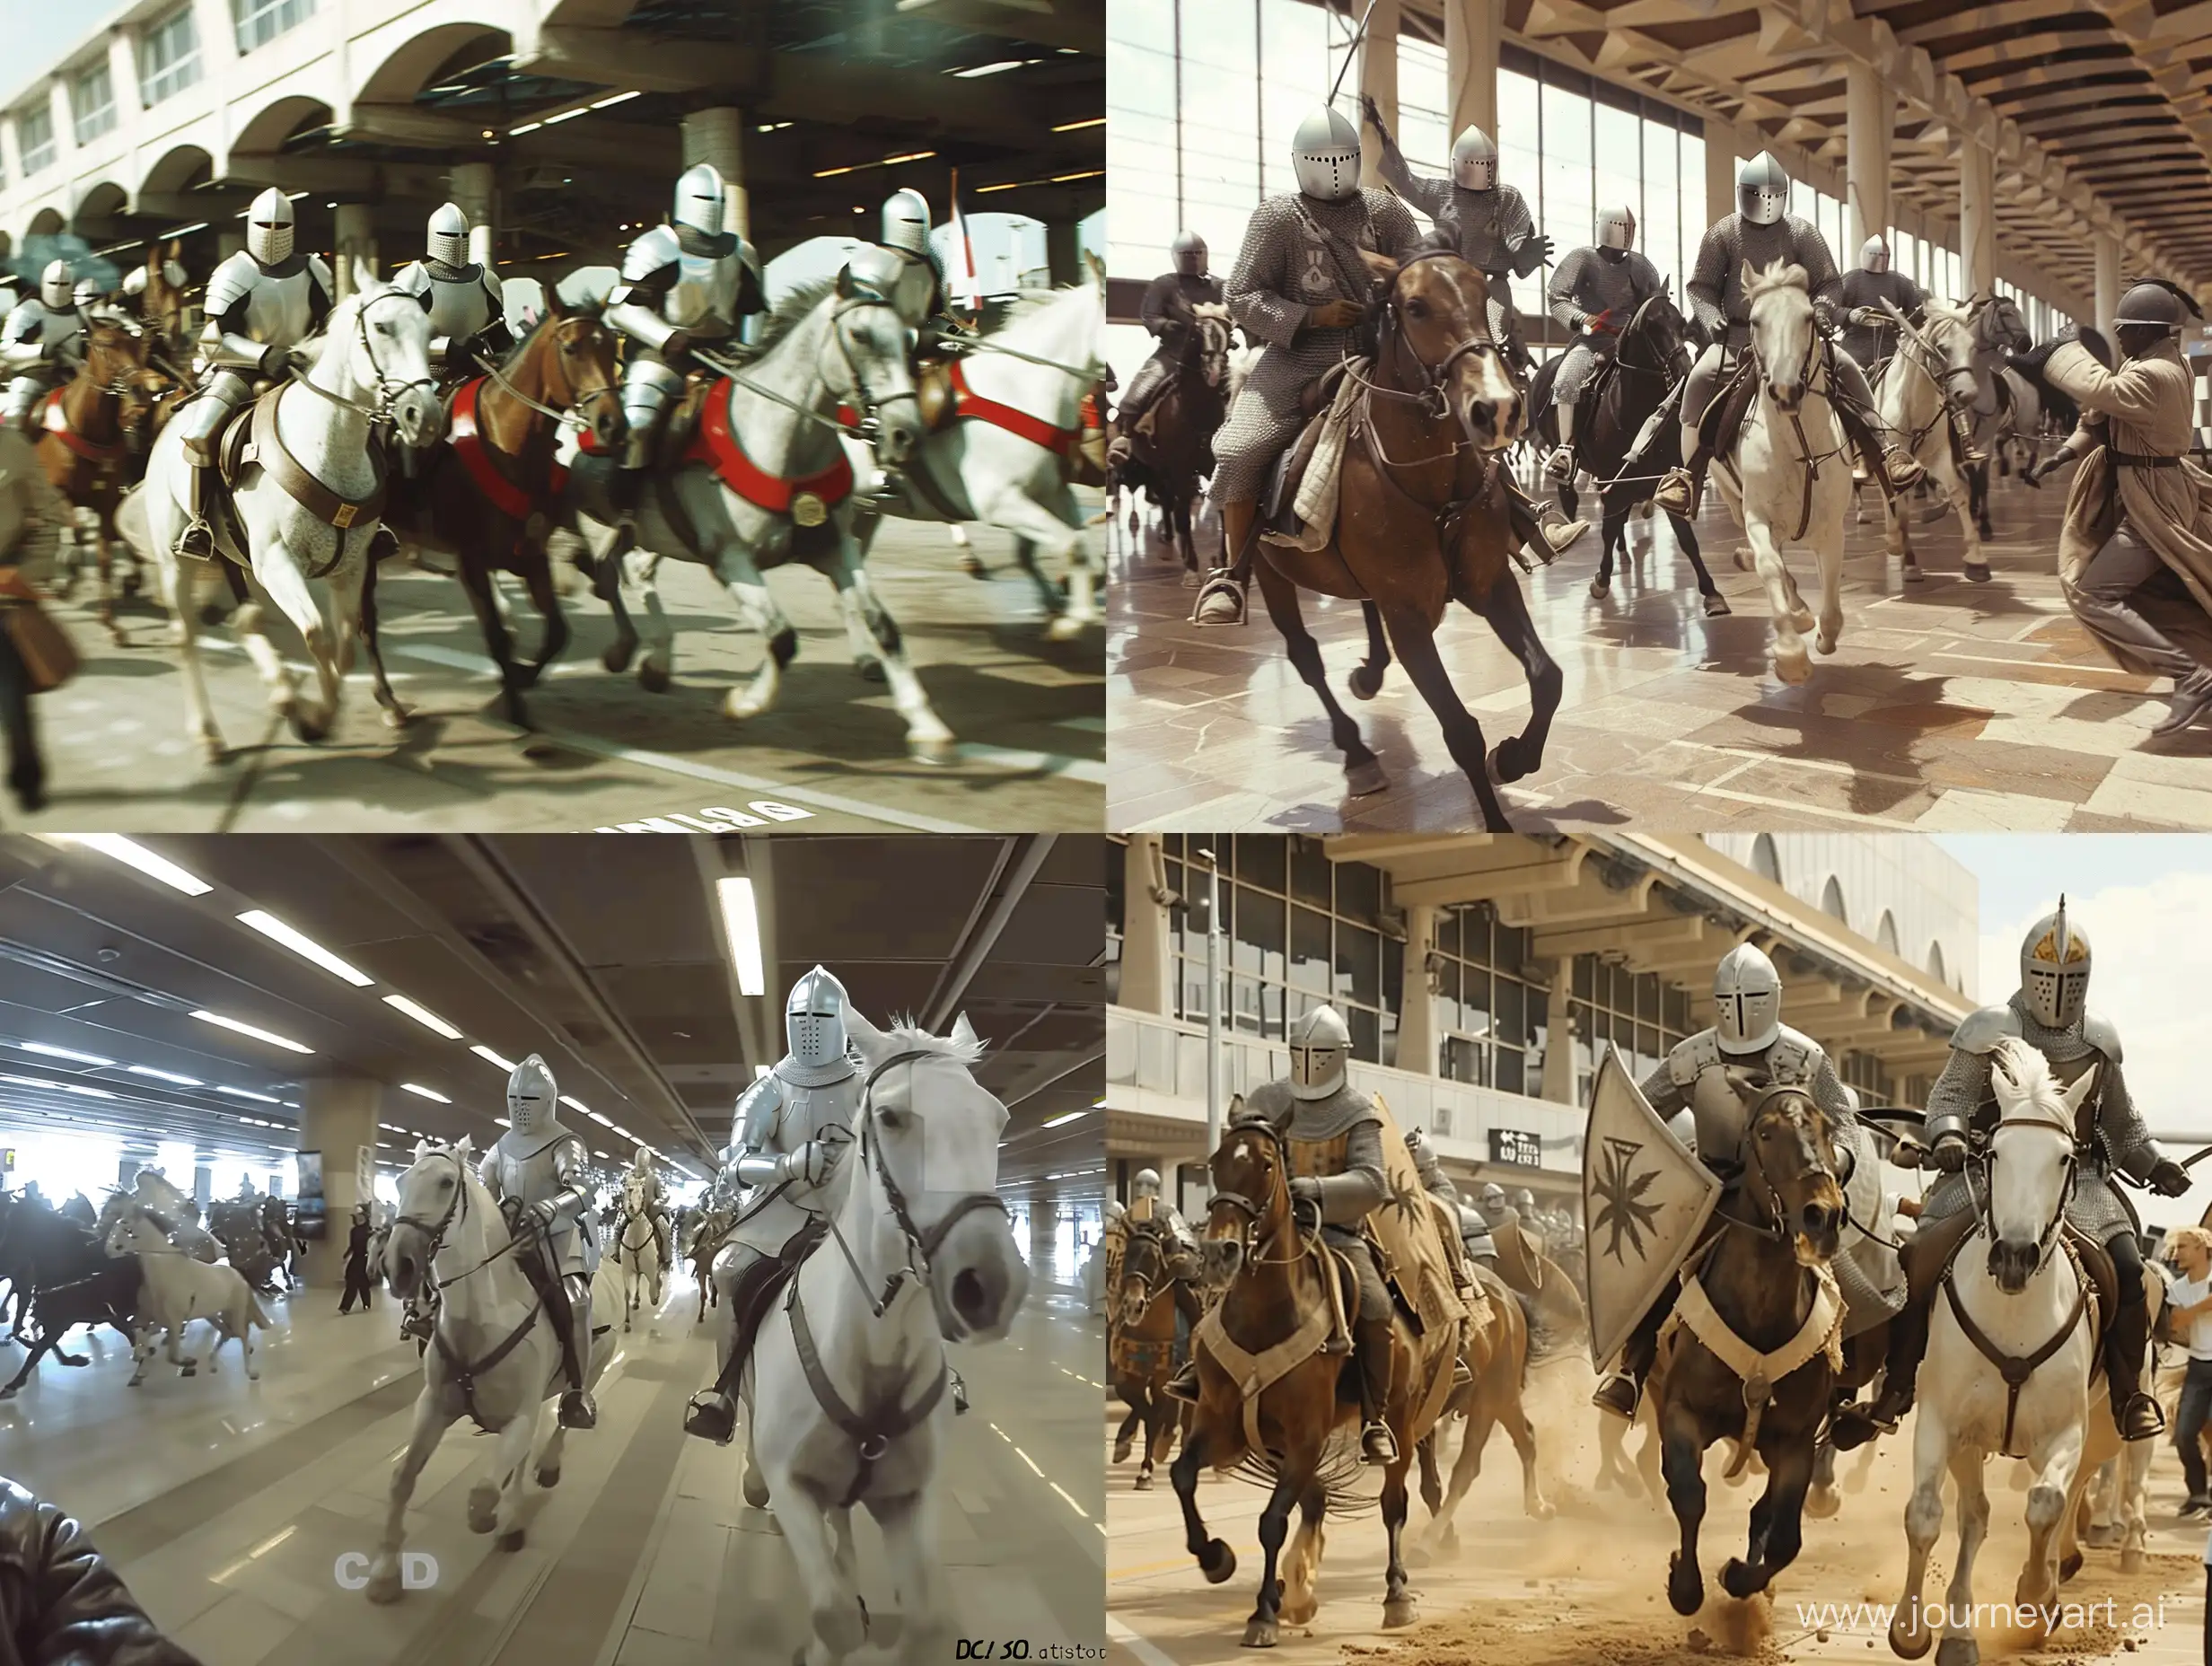 cctv footage showing templar knights storming an airport on horseback, civillians running away in fear, horses running, date on the bottom left corner